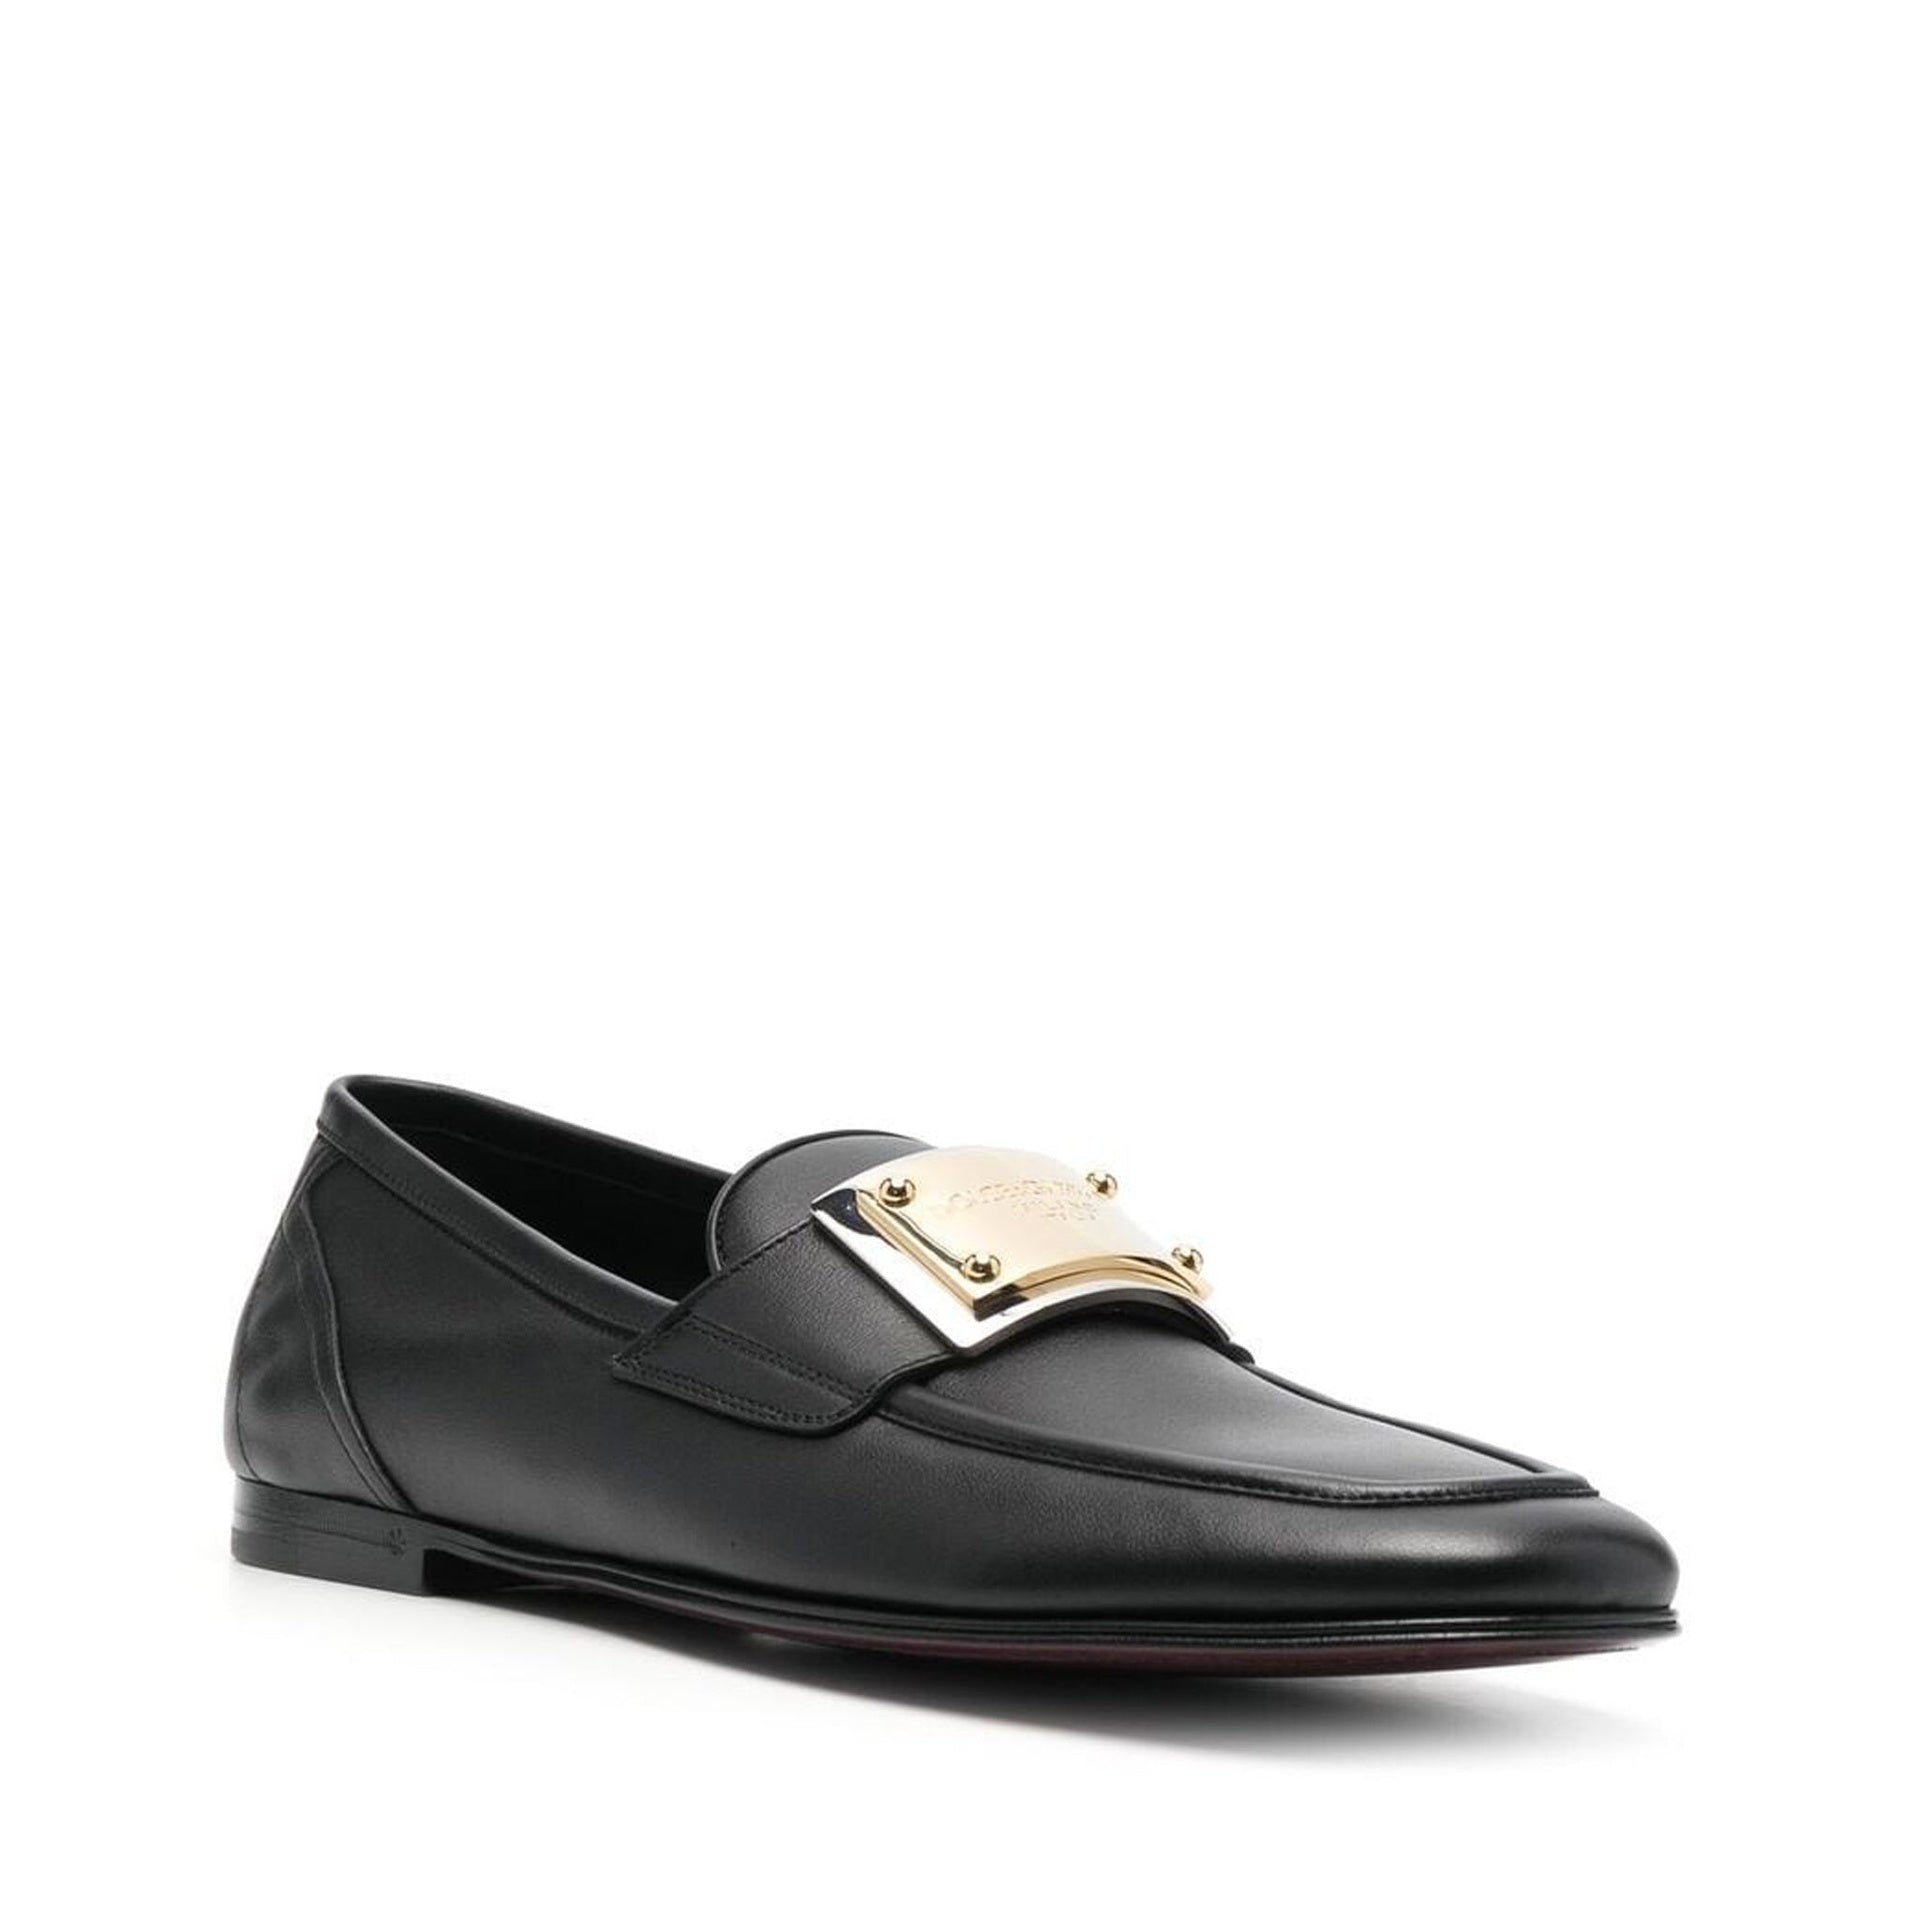 DOLCE-GABBANA-OUTLET-SALE-Dolce-Gabbana-Leather-Logo-Loafers-Flache-Schuhe-ARCHIVE-COLLECTION-2.jpg